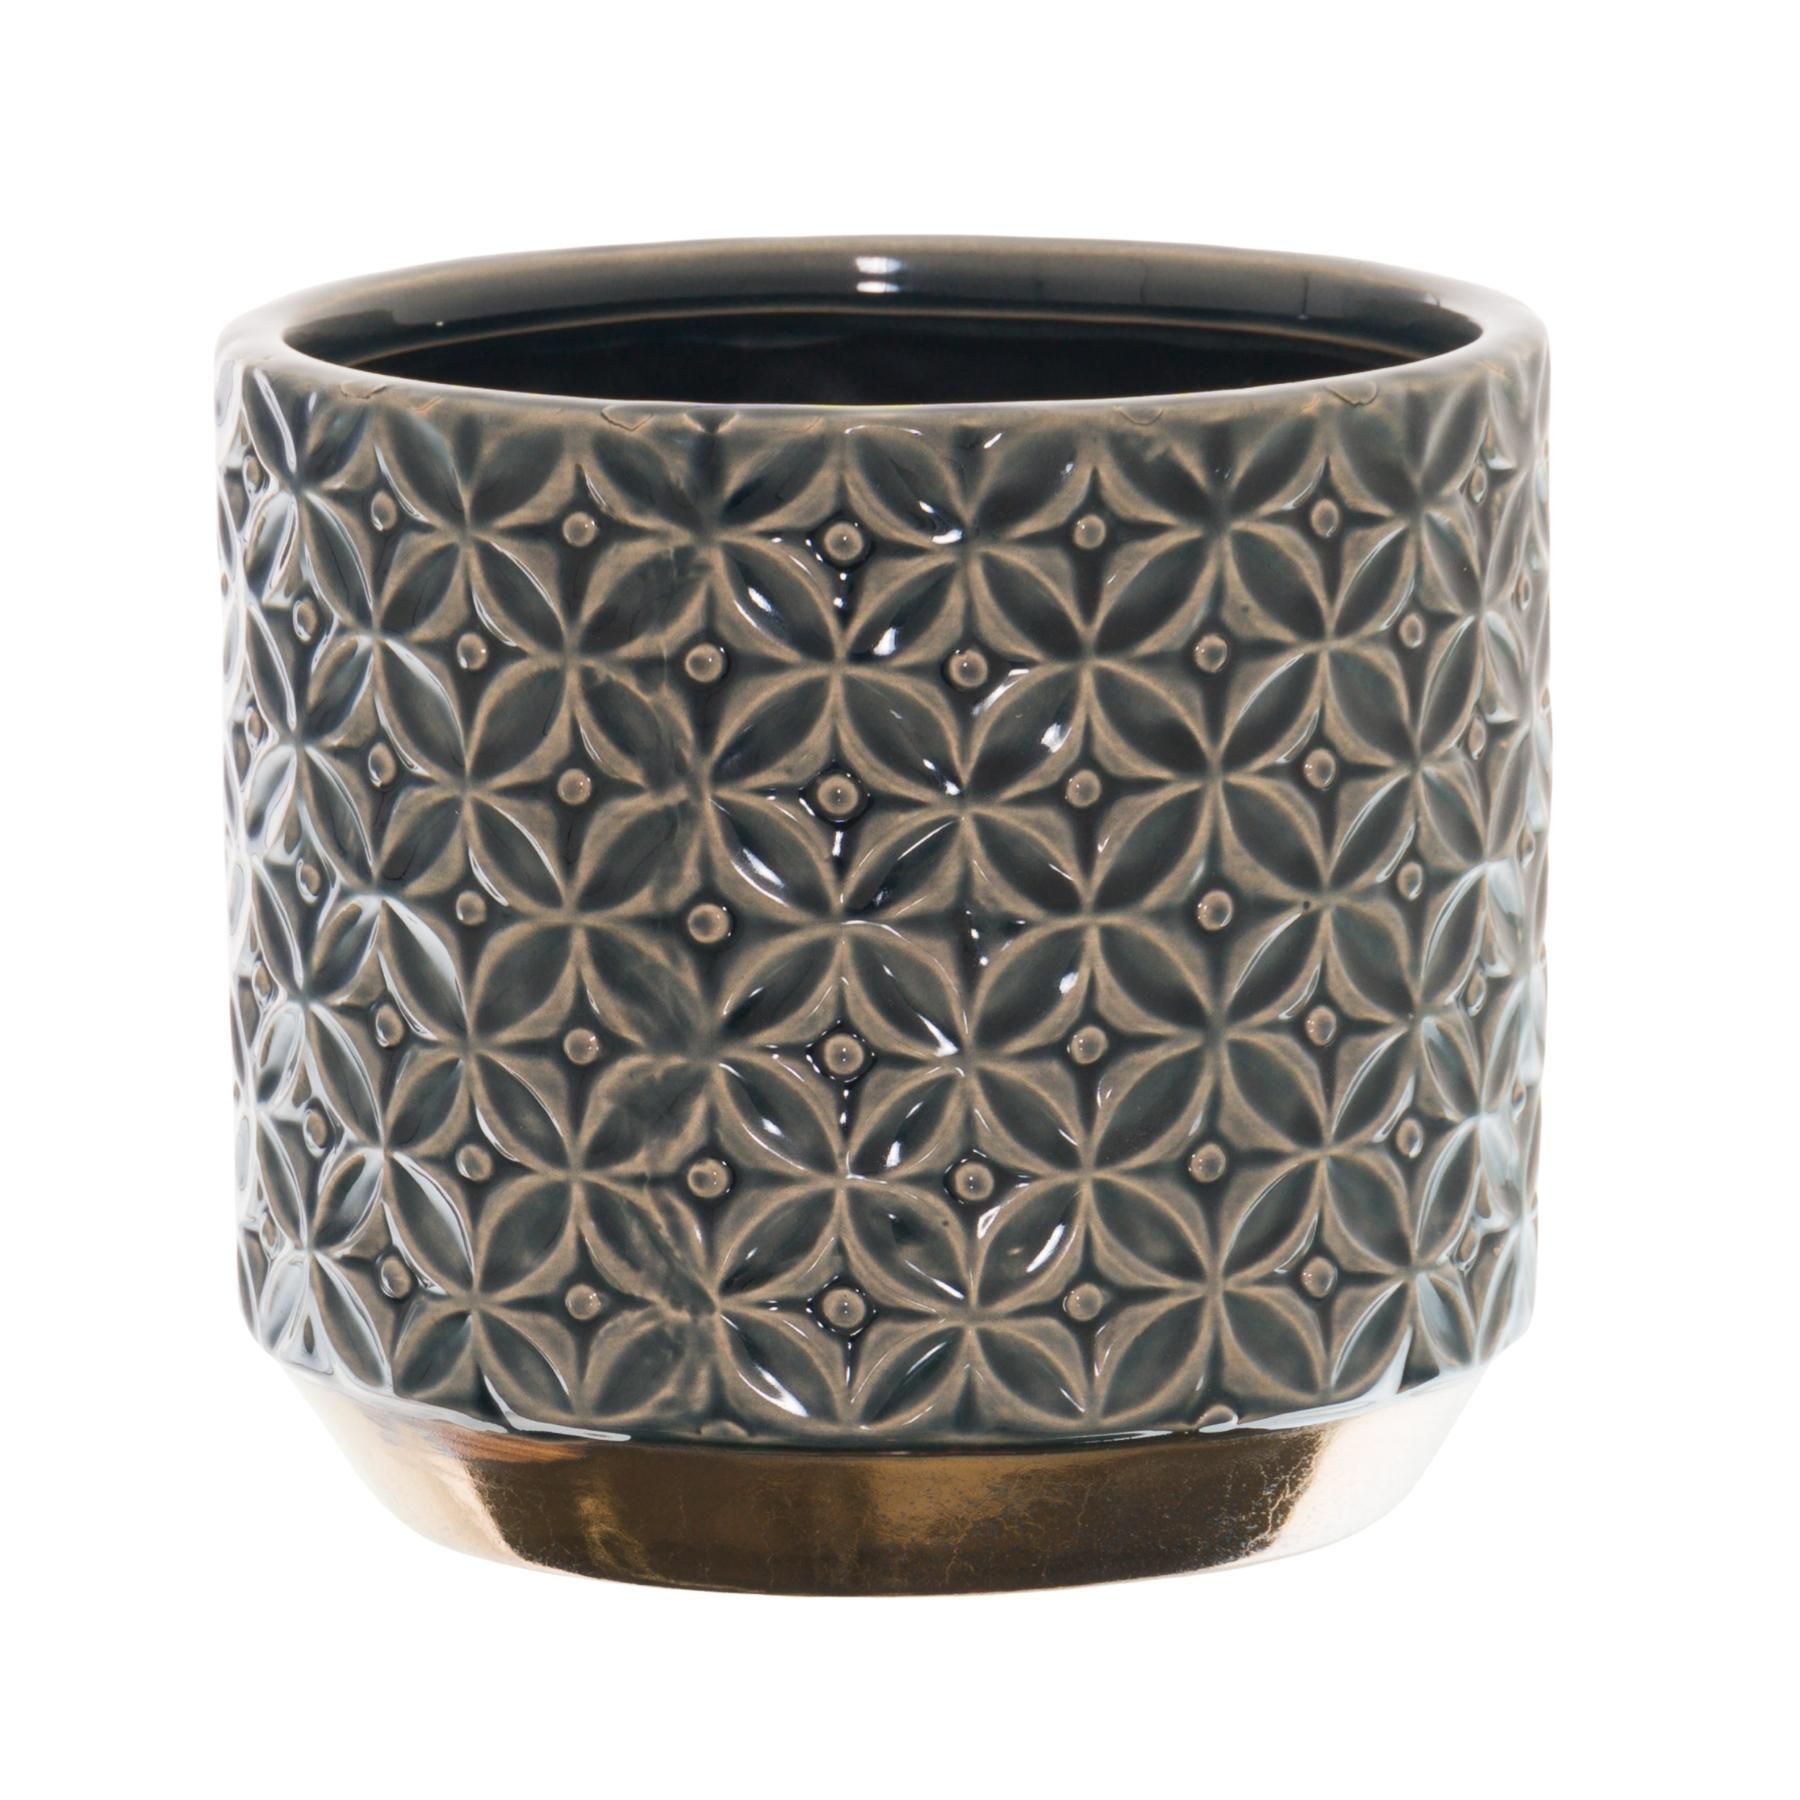 Seville Collection Lebes Planter - Image 1